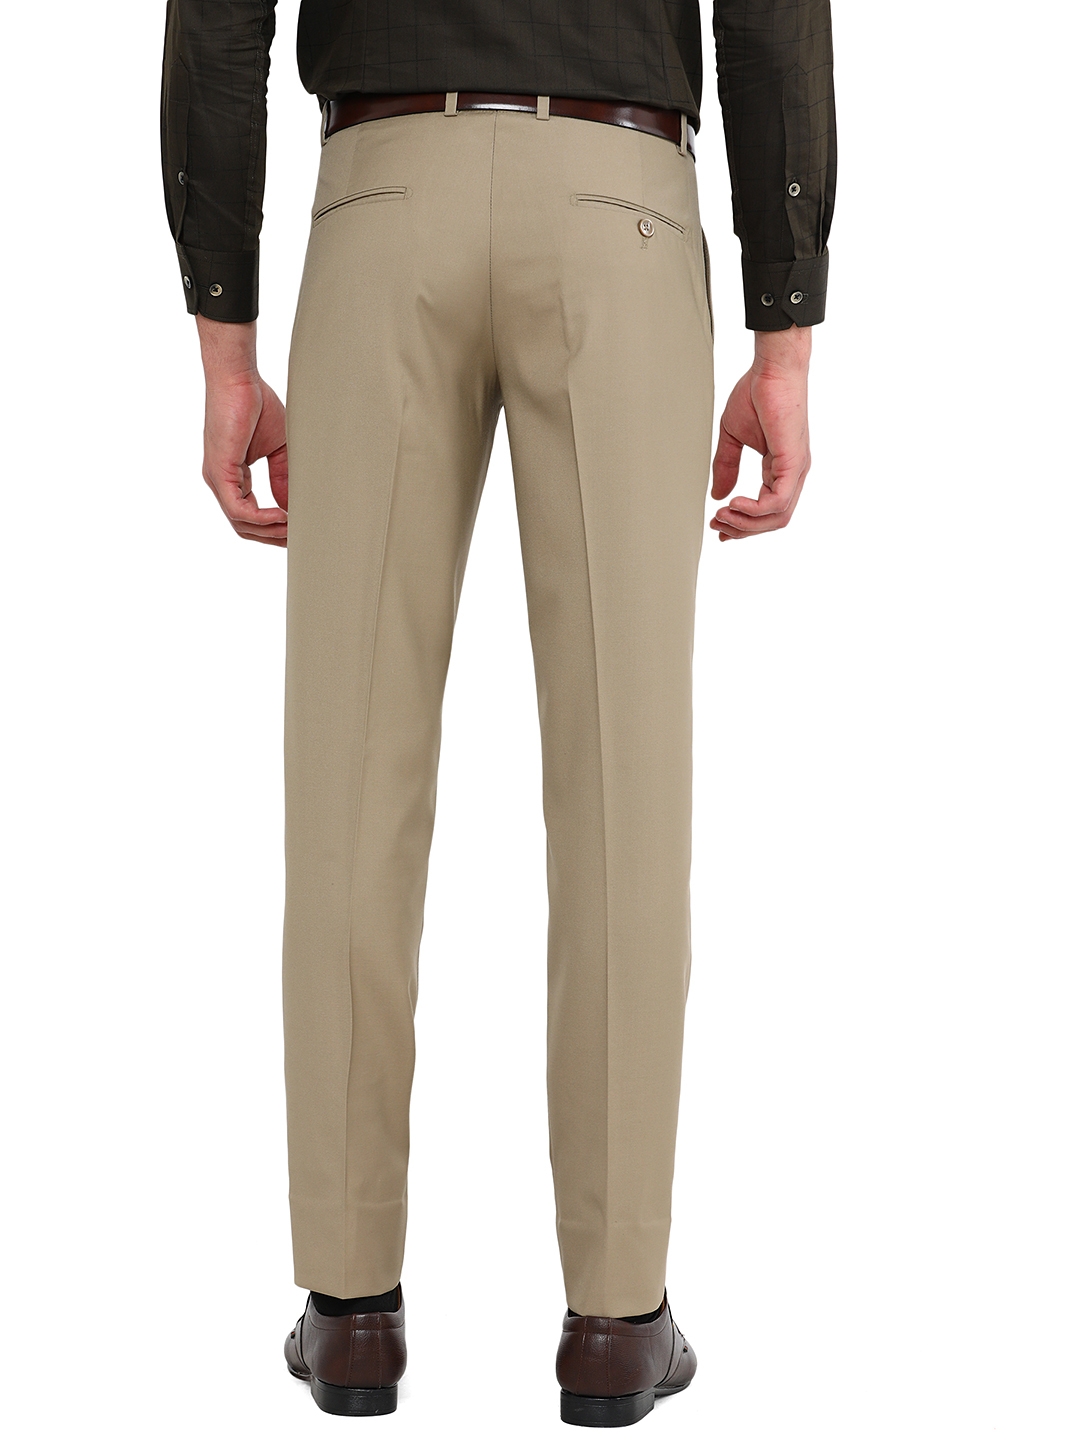 Greenfibre | Fawn Solid Slim Fit Formal Trouser | Greenfibre 2